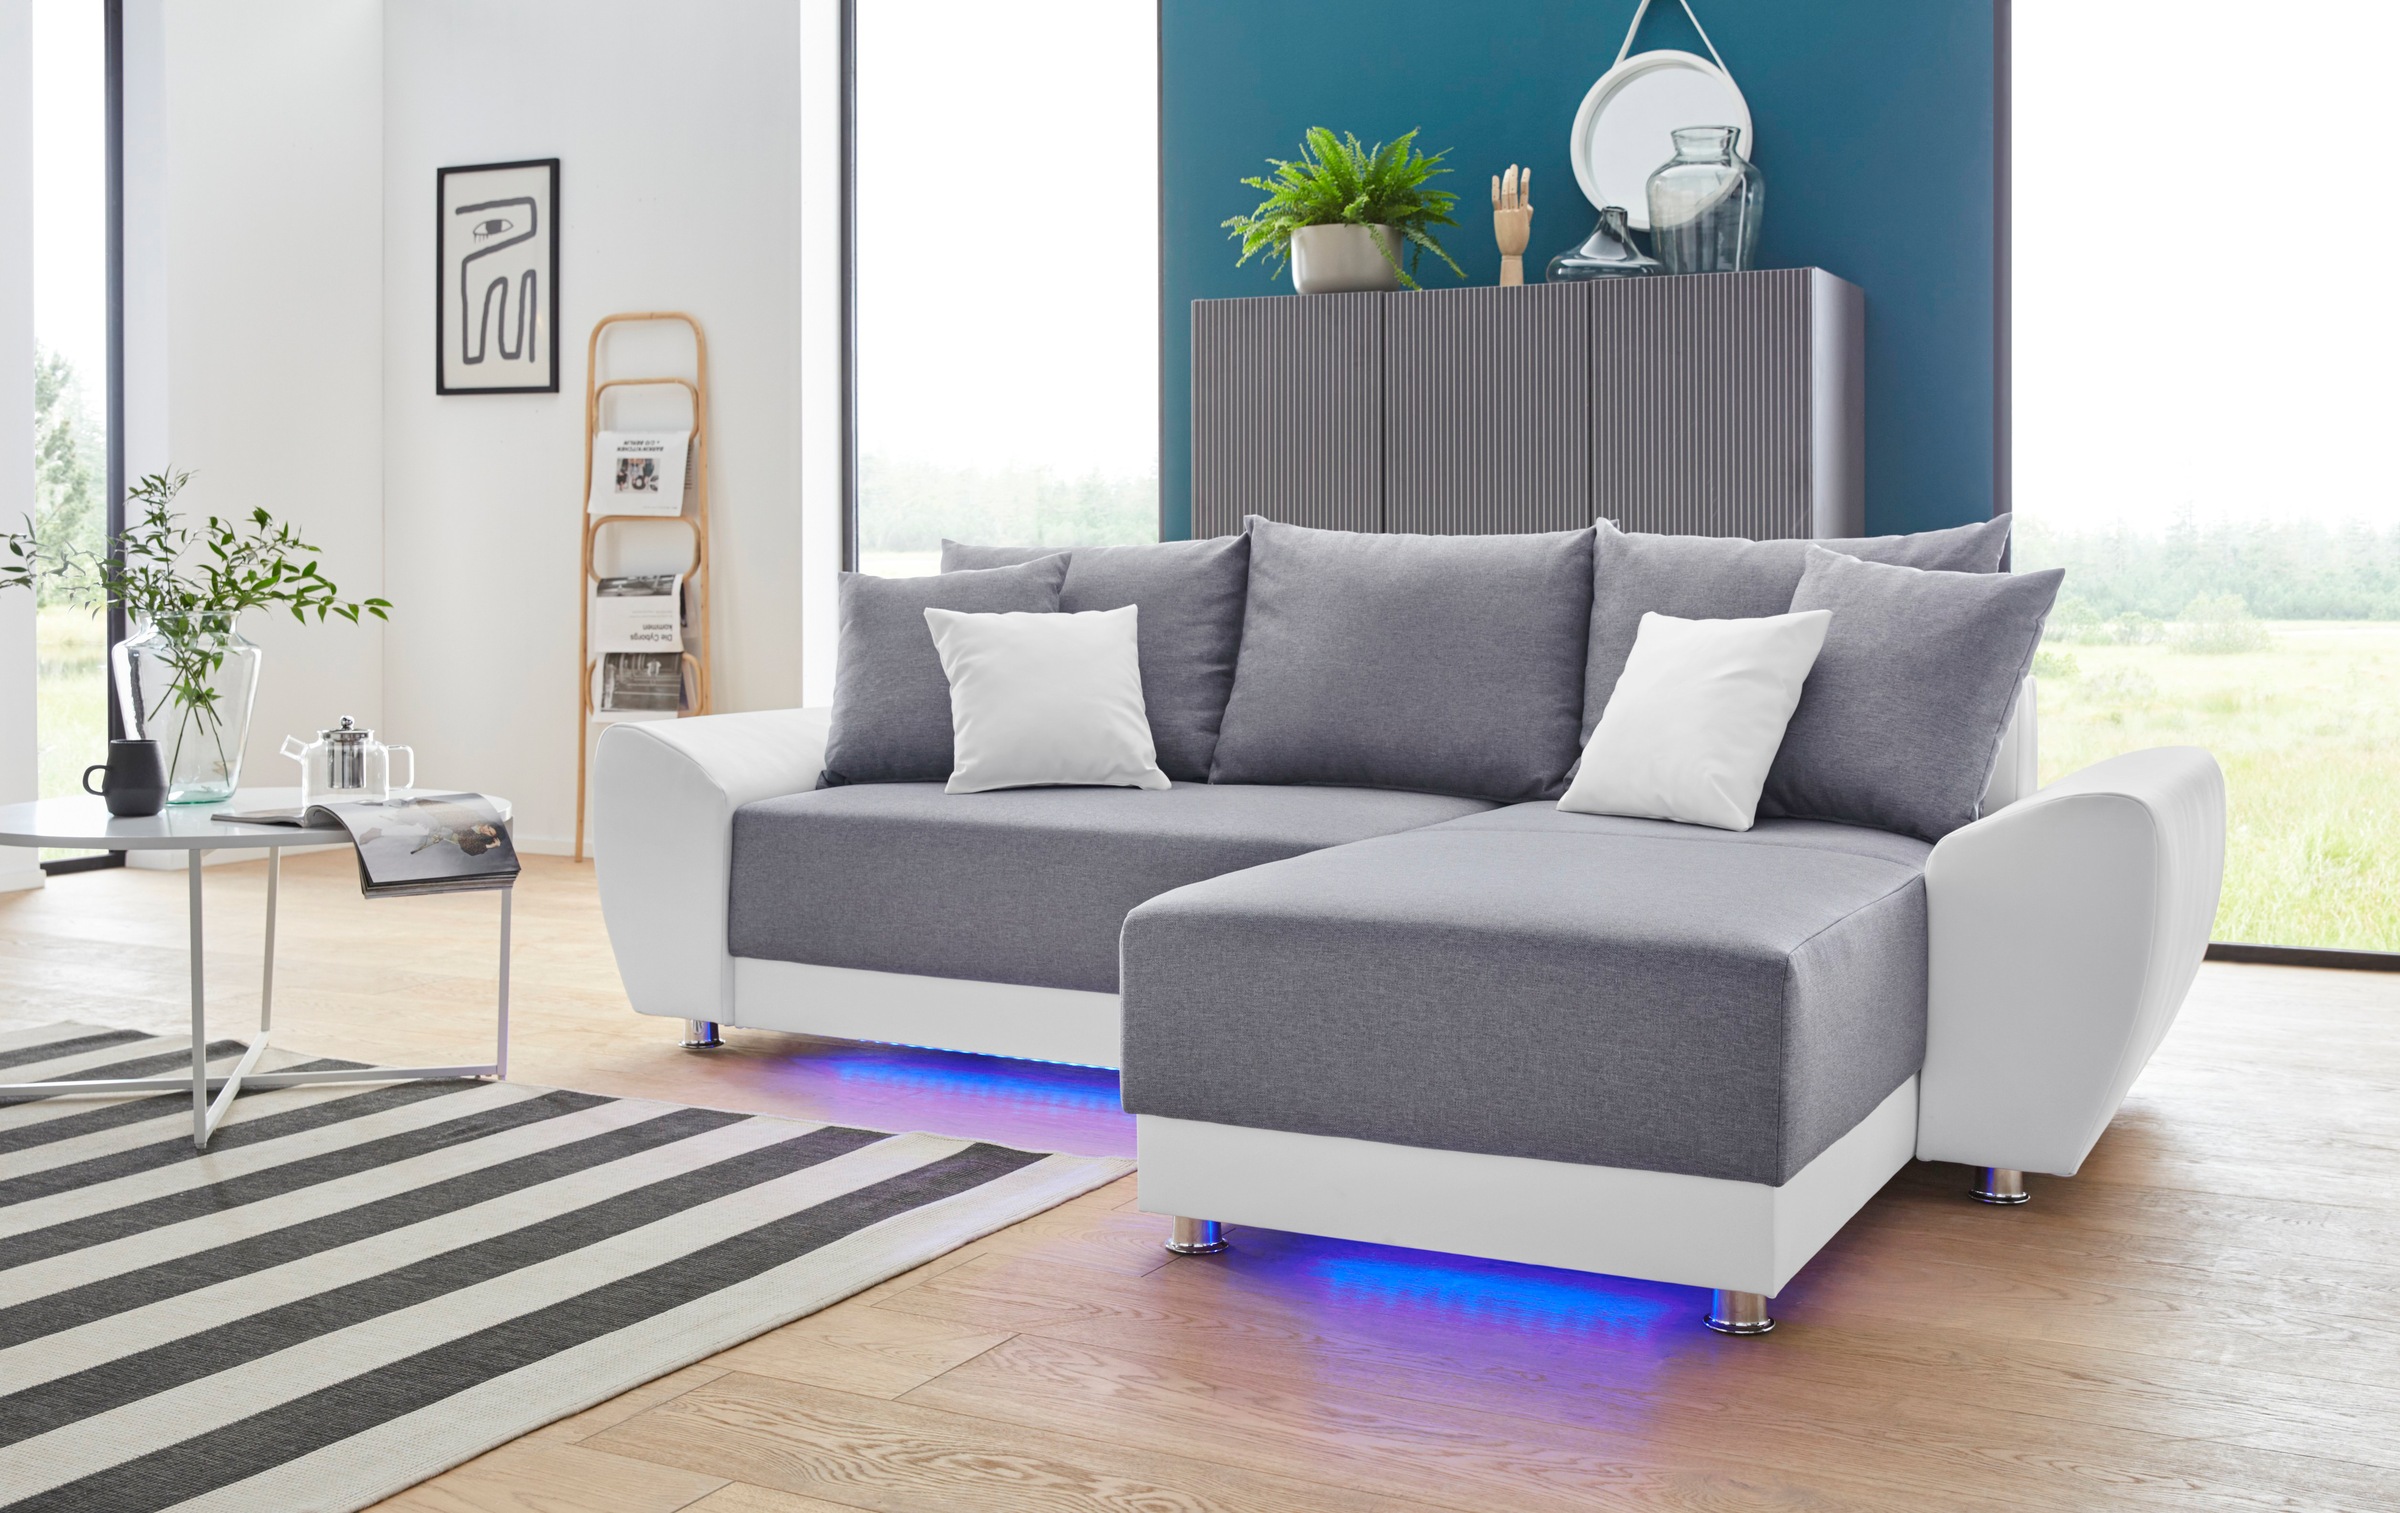 COLLECTION AB Ecksofa »Riviera L-Form«, LED-RGB-Beleuchtung